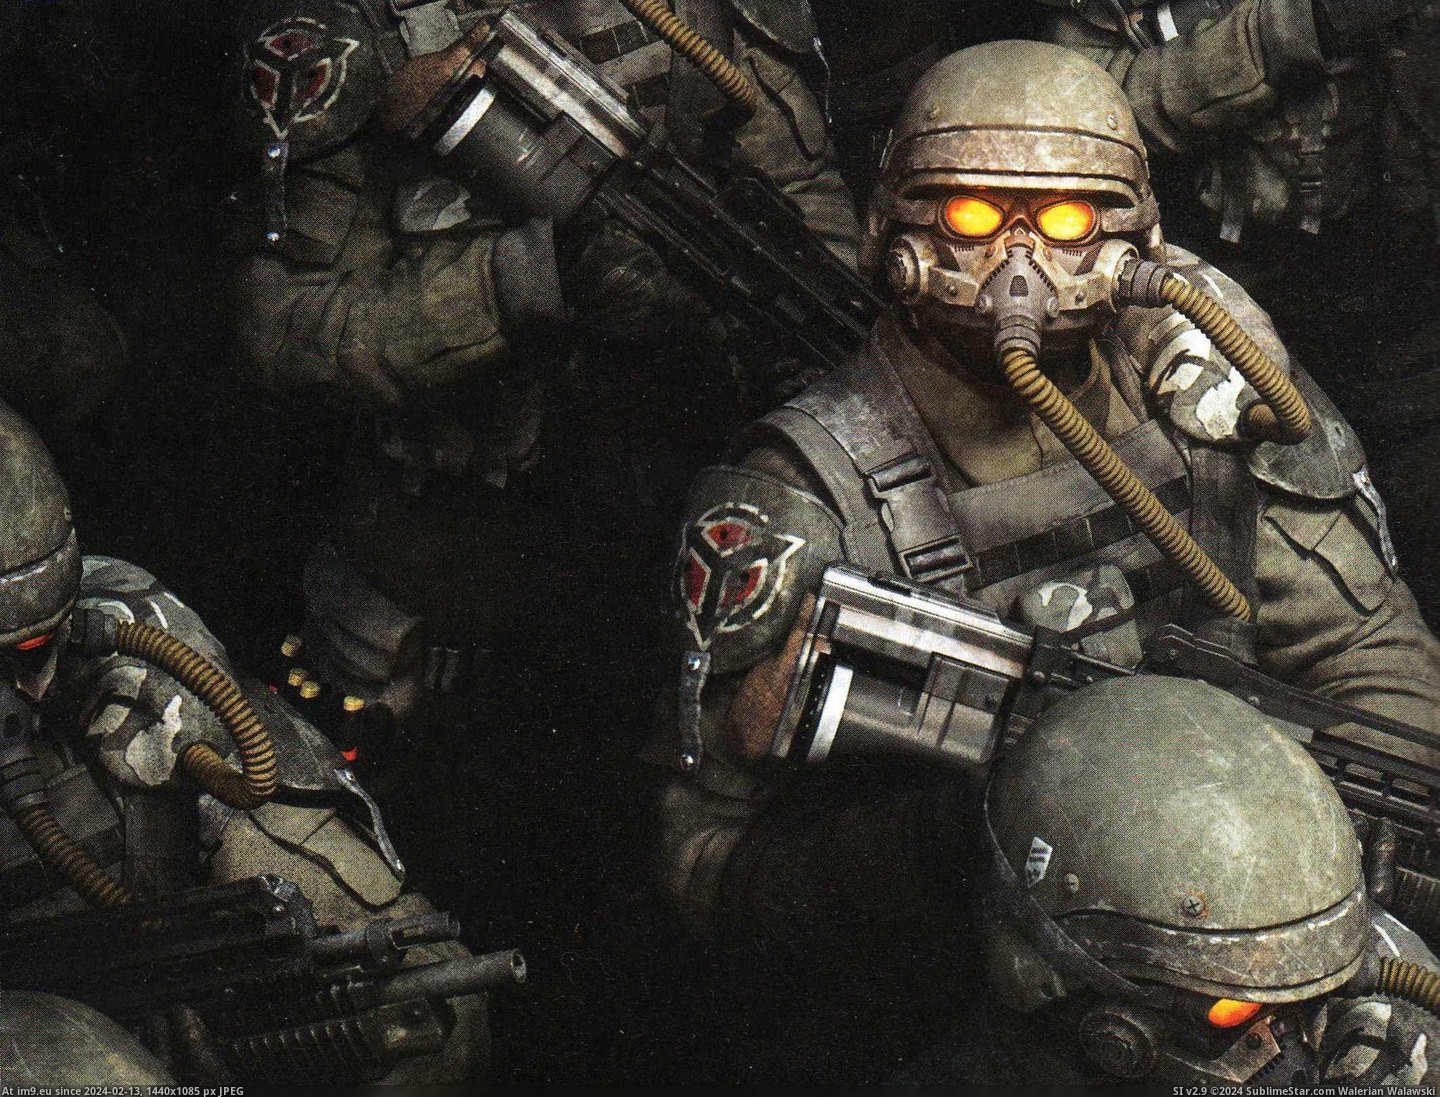 #Game #Killzone #Video Video Game Killzone 67631 Pic. (Image of album Games Wallpapers))